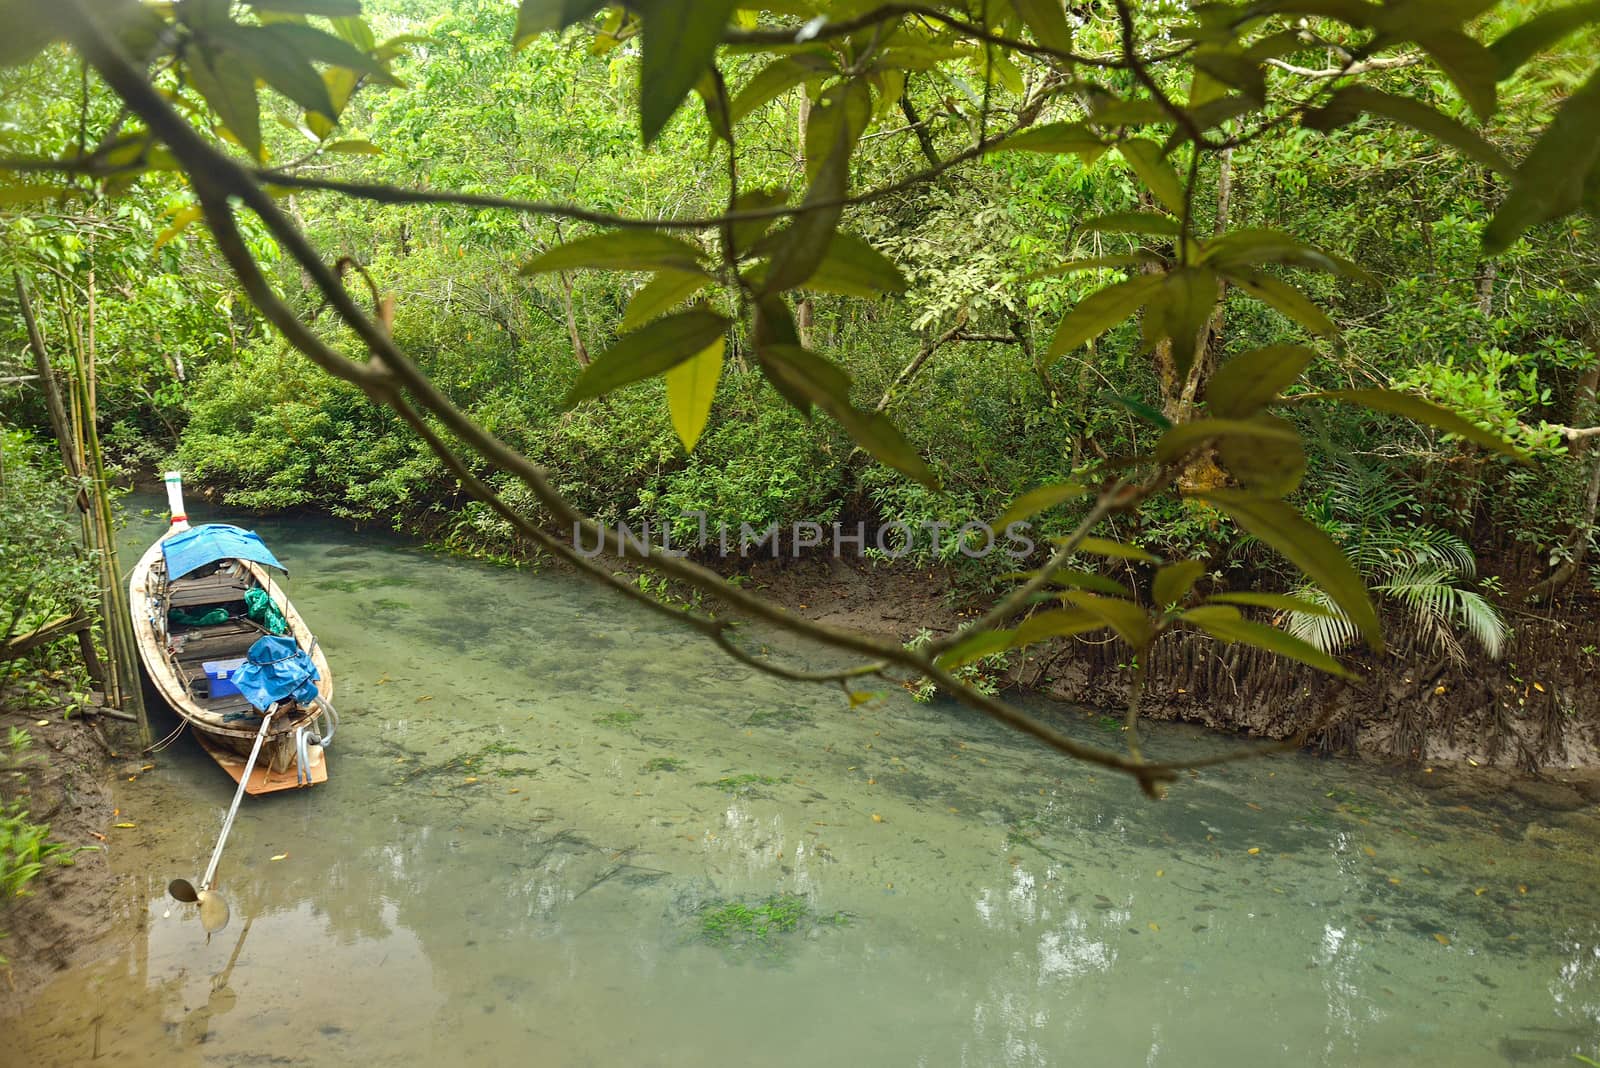 longtail boat in mangroves forest, Krabi, Thailand. by think4photop